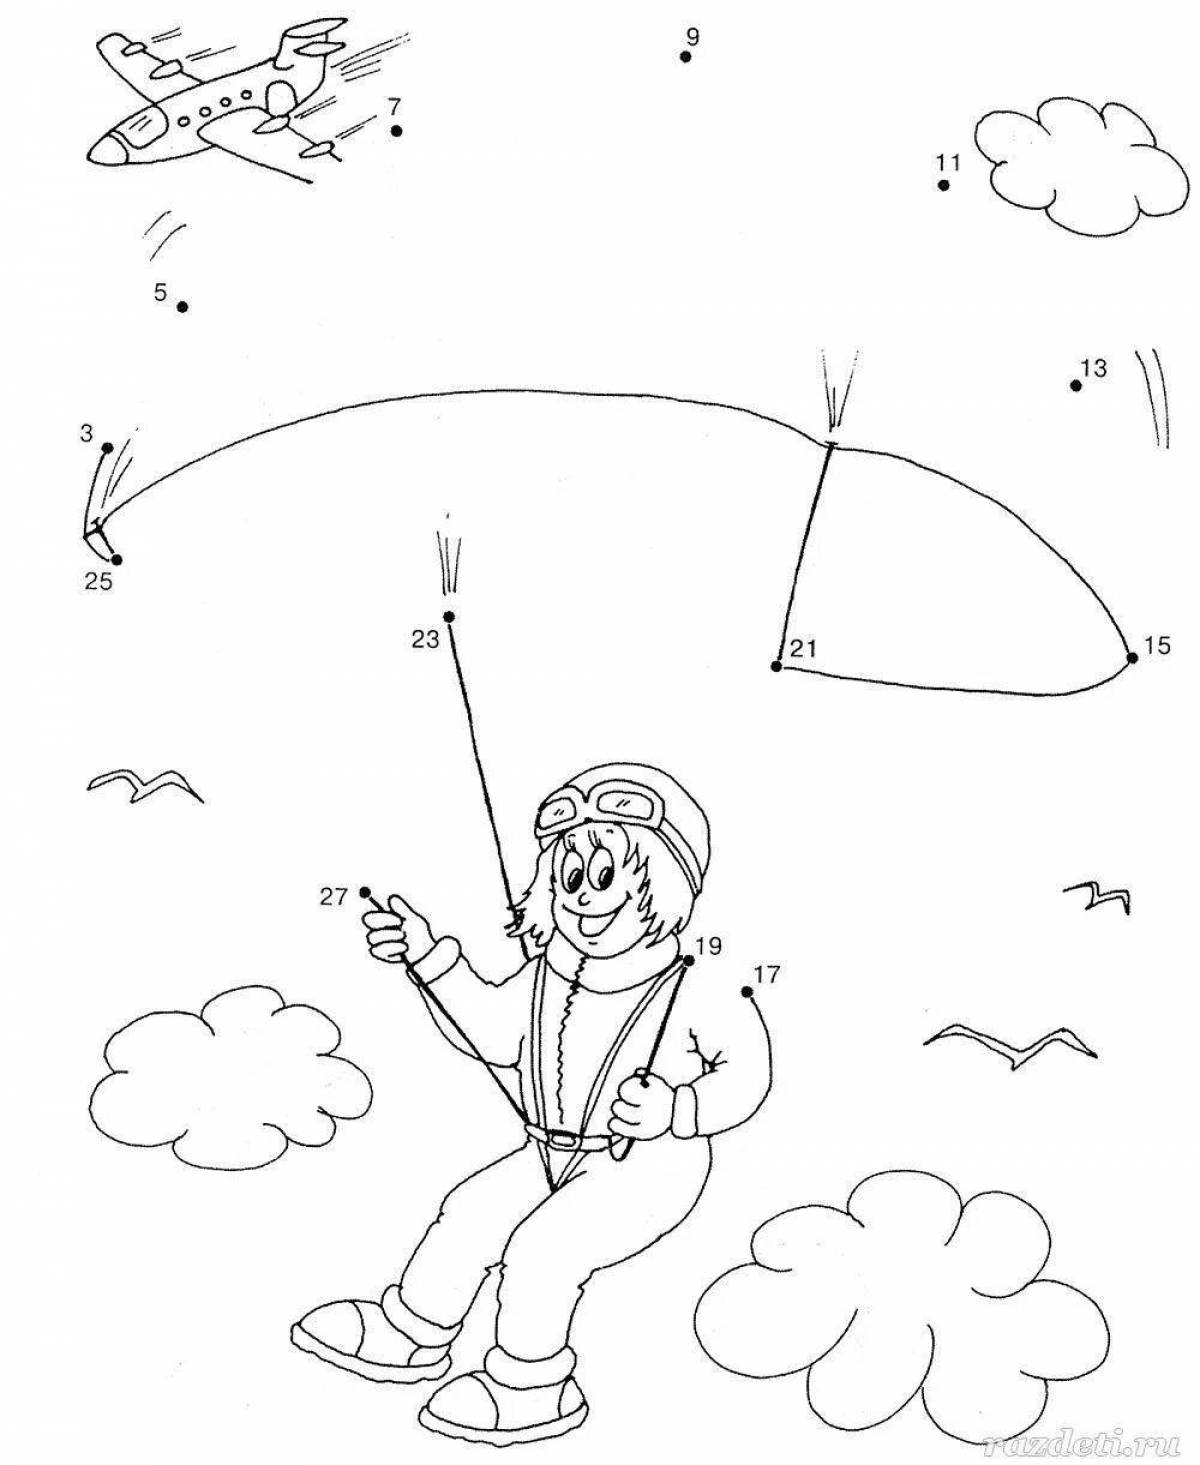 Bold skydiver coloring page for kids